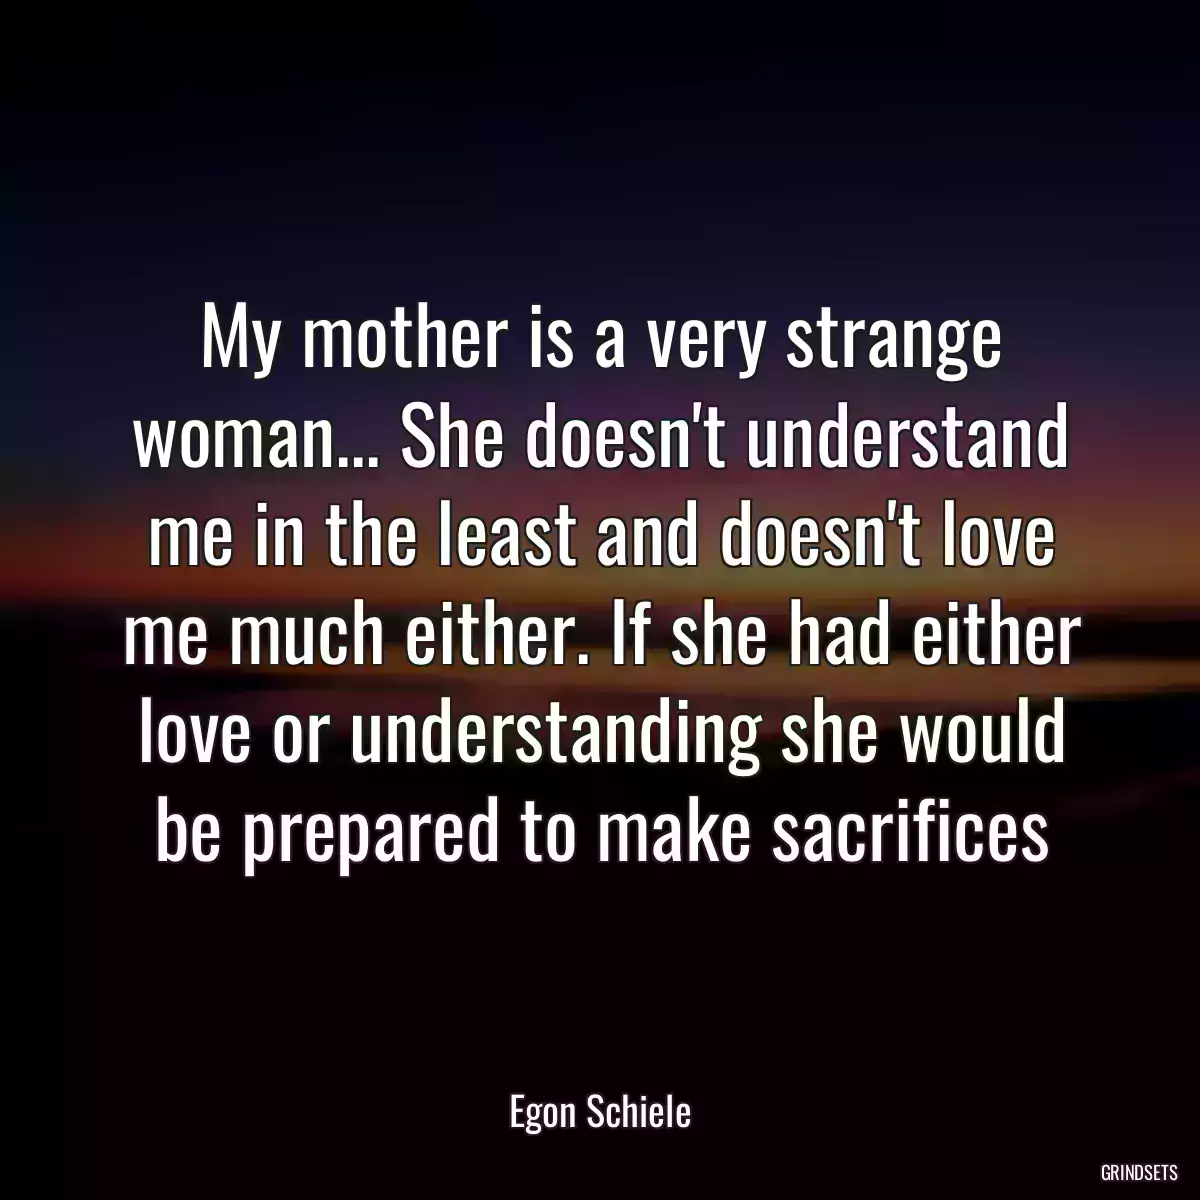 My mother is a very strange woman... She doesn\'t understand me in the least and doesn\'t love me much either. If she had either love or understanding she would be prepared to make sacrifices